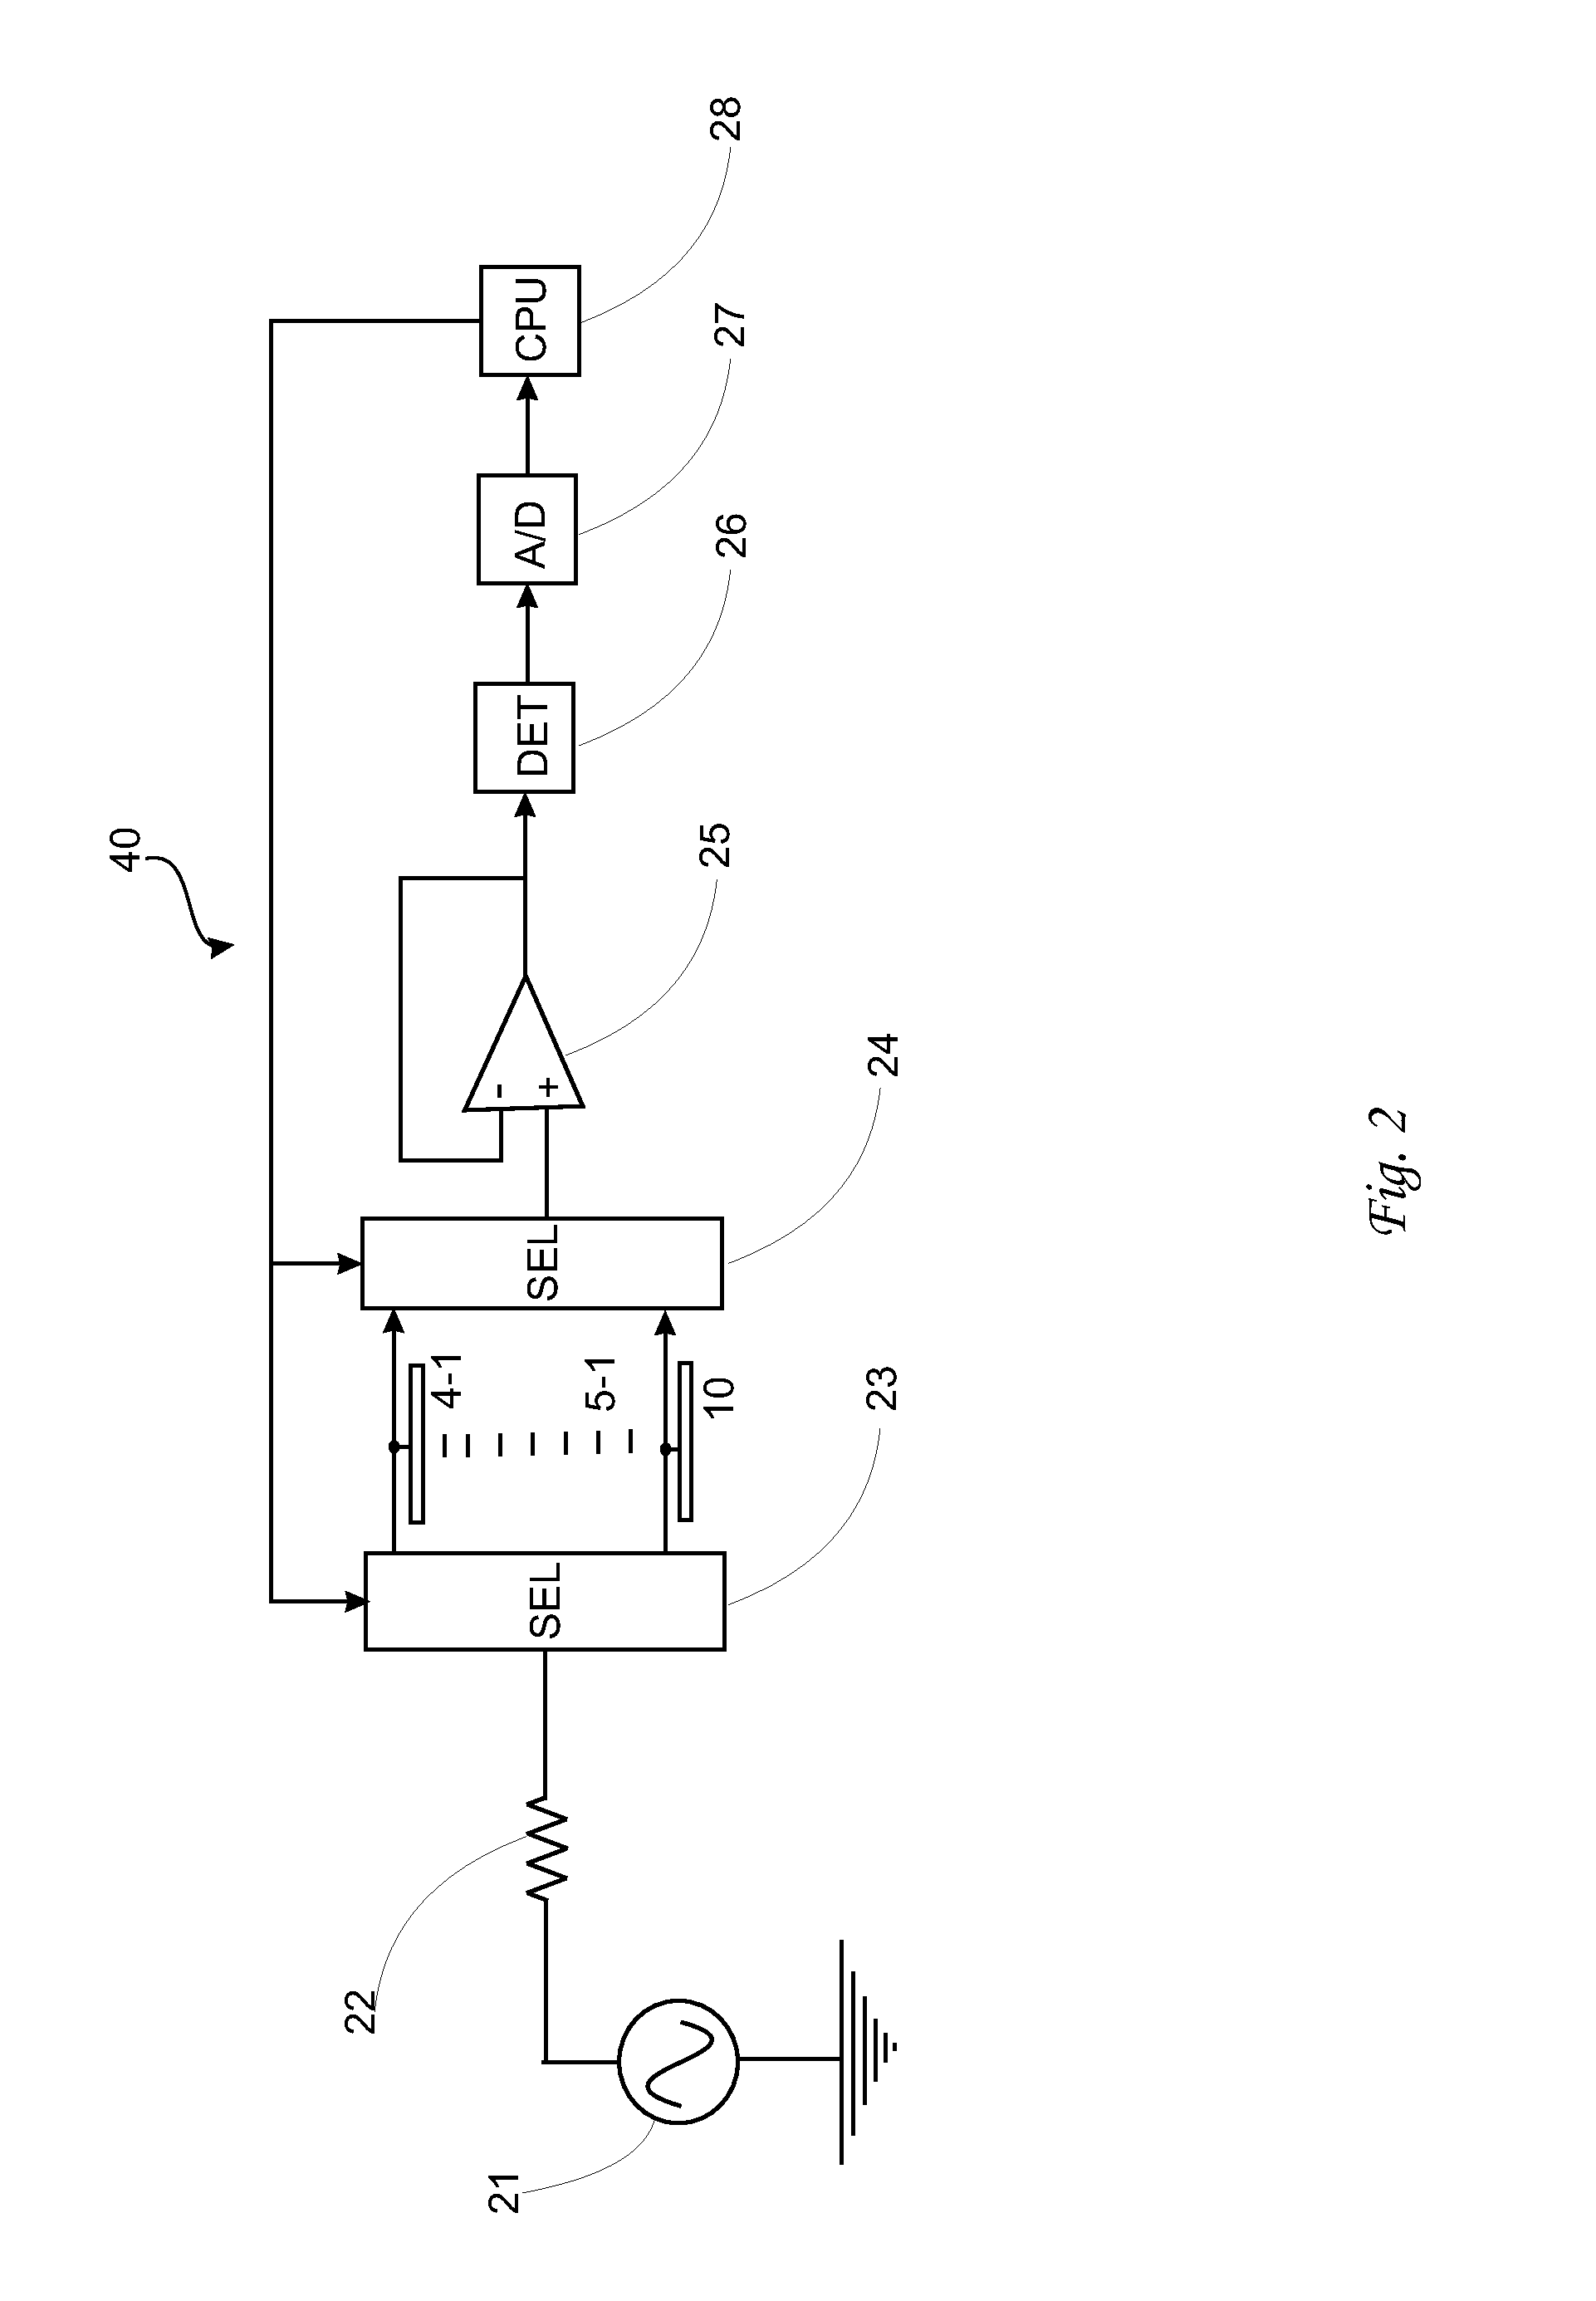 Driver health and fatigue monitoring system and method